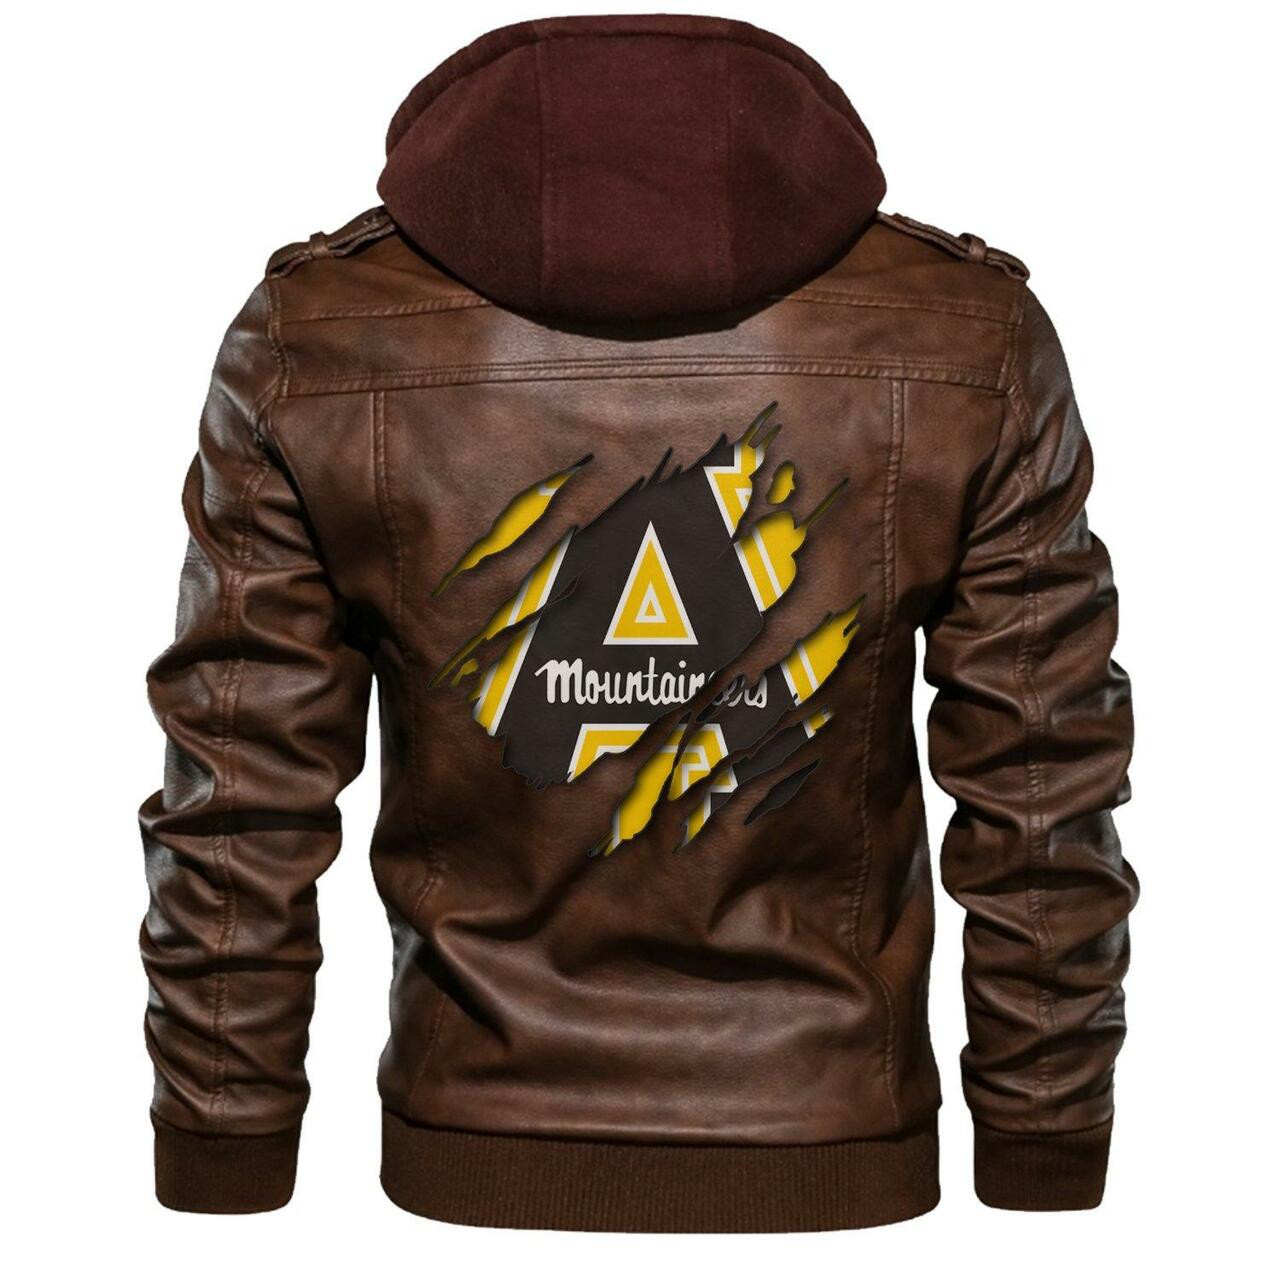 These Amazing Leather Jacket will add to the appeal of your outfit 133